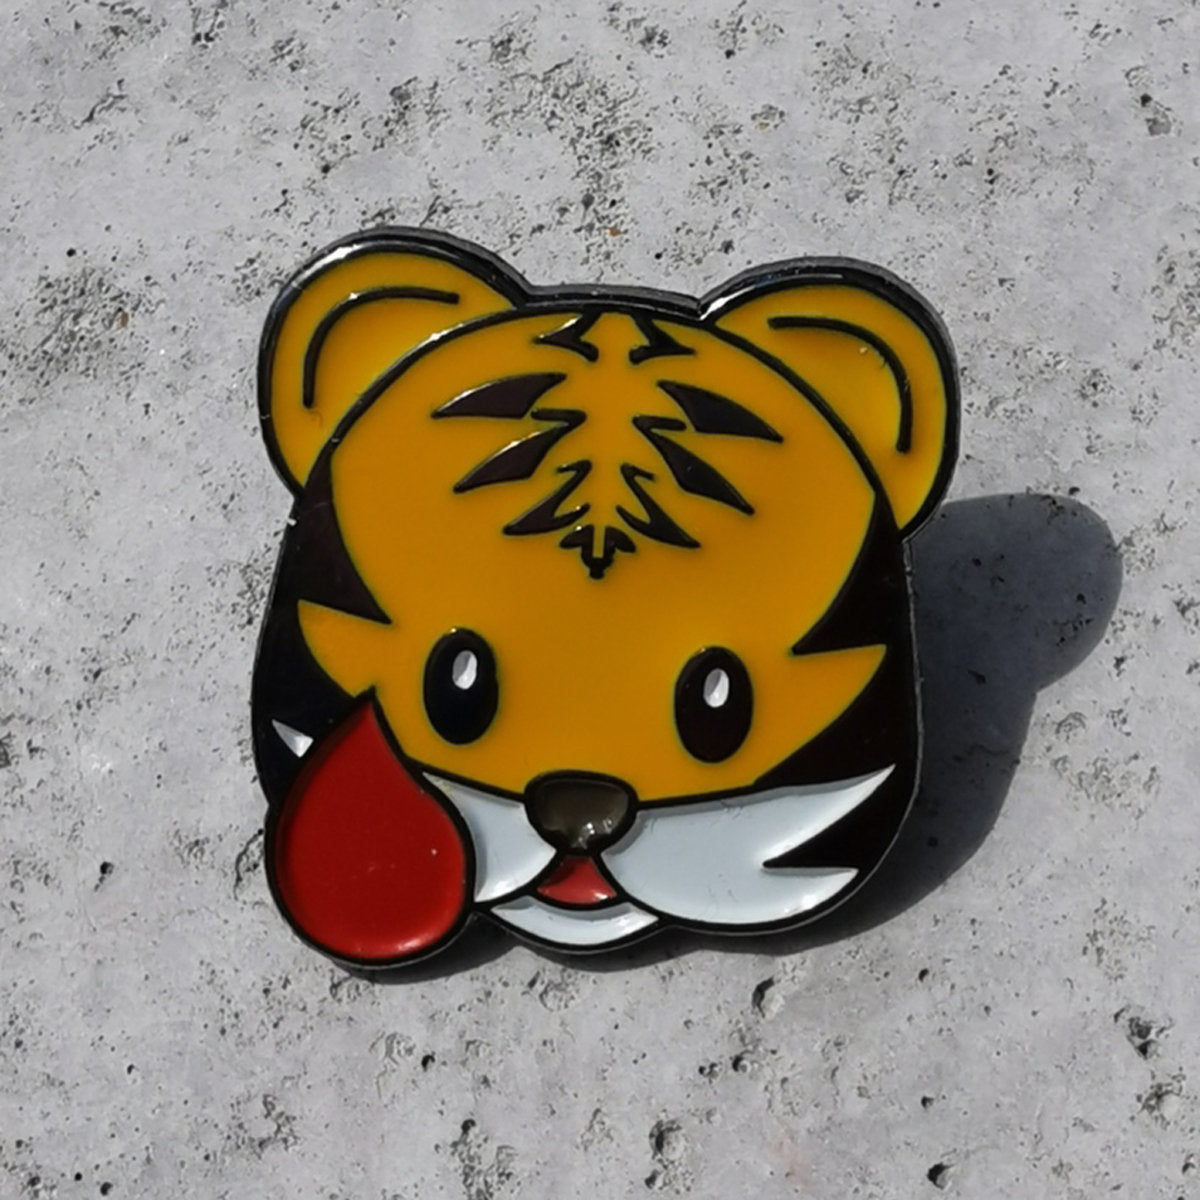 Tiger Blood Tapes limited edition numbered enamel lapel pin